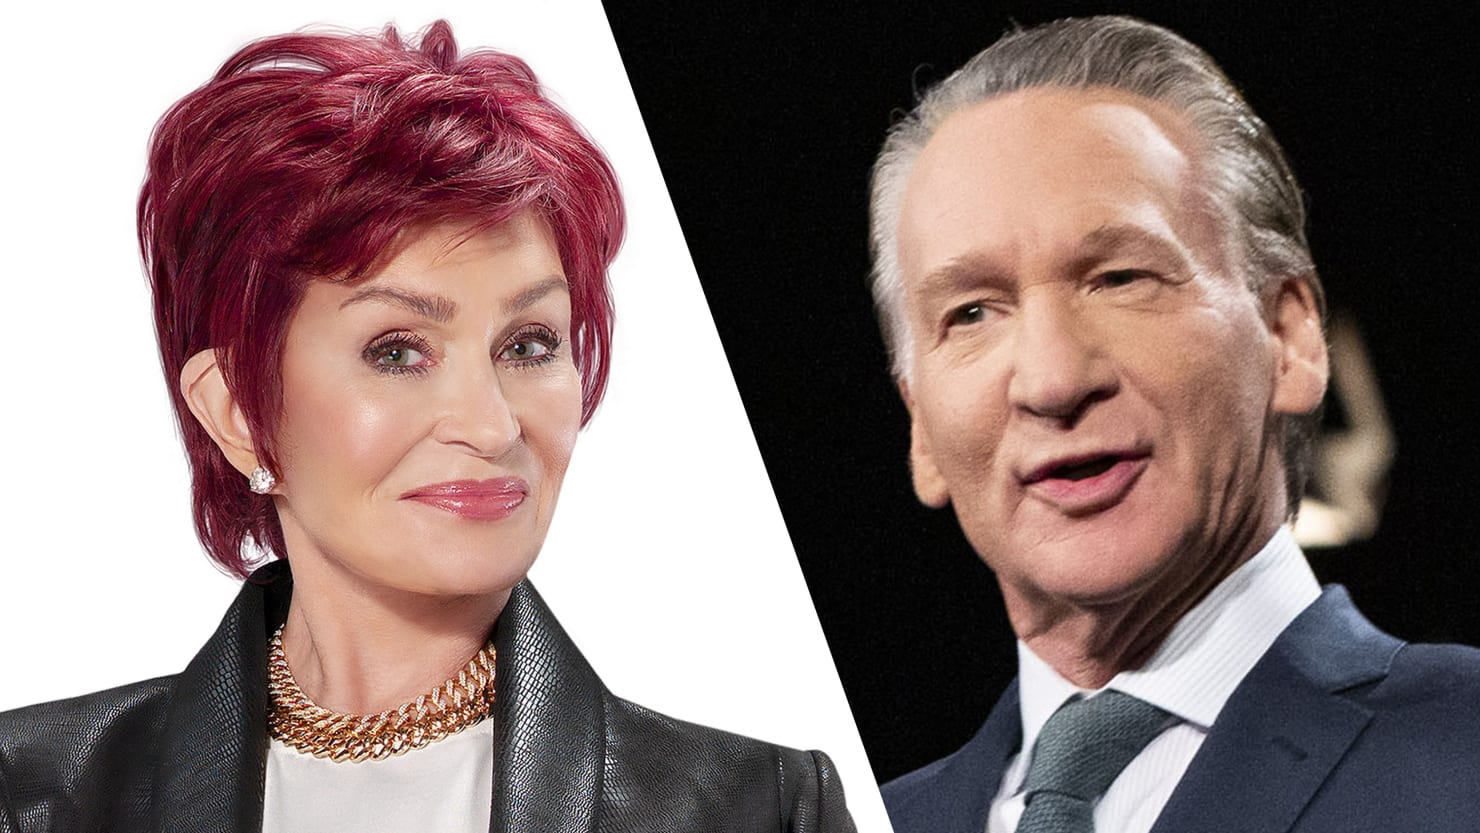 Sharon Osbourne and Bill Maher Whine on Canceling Culture on ‘Real Time’